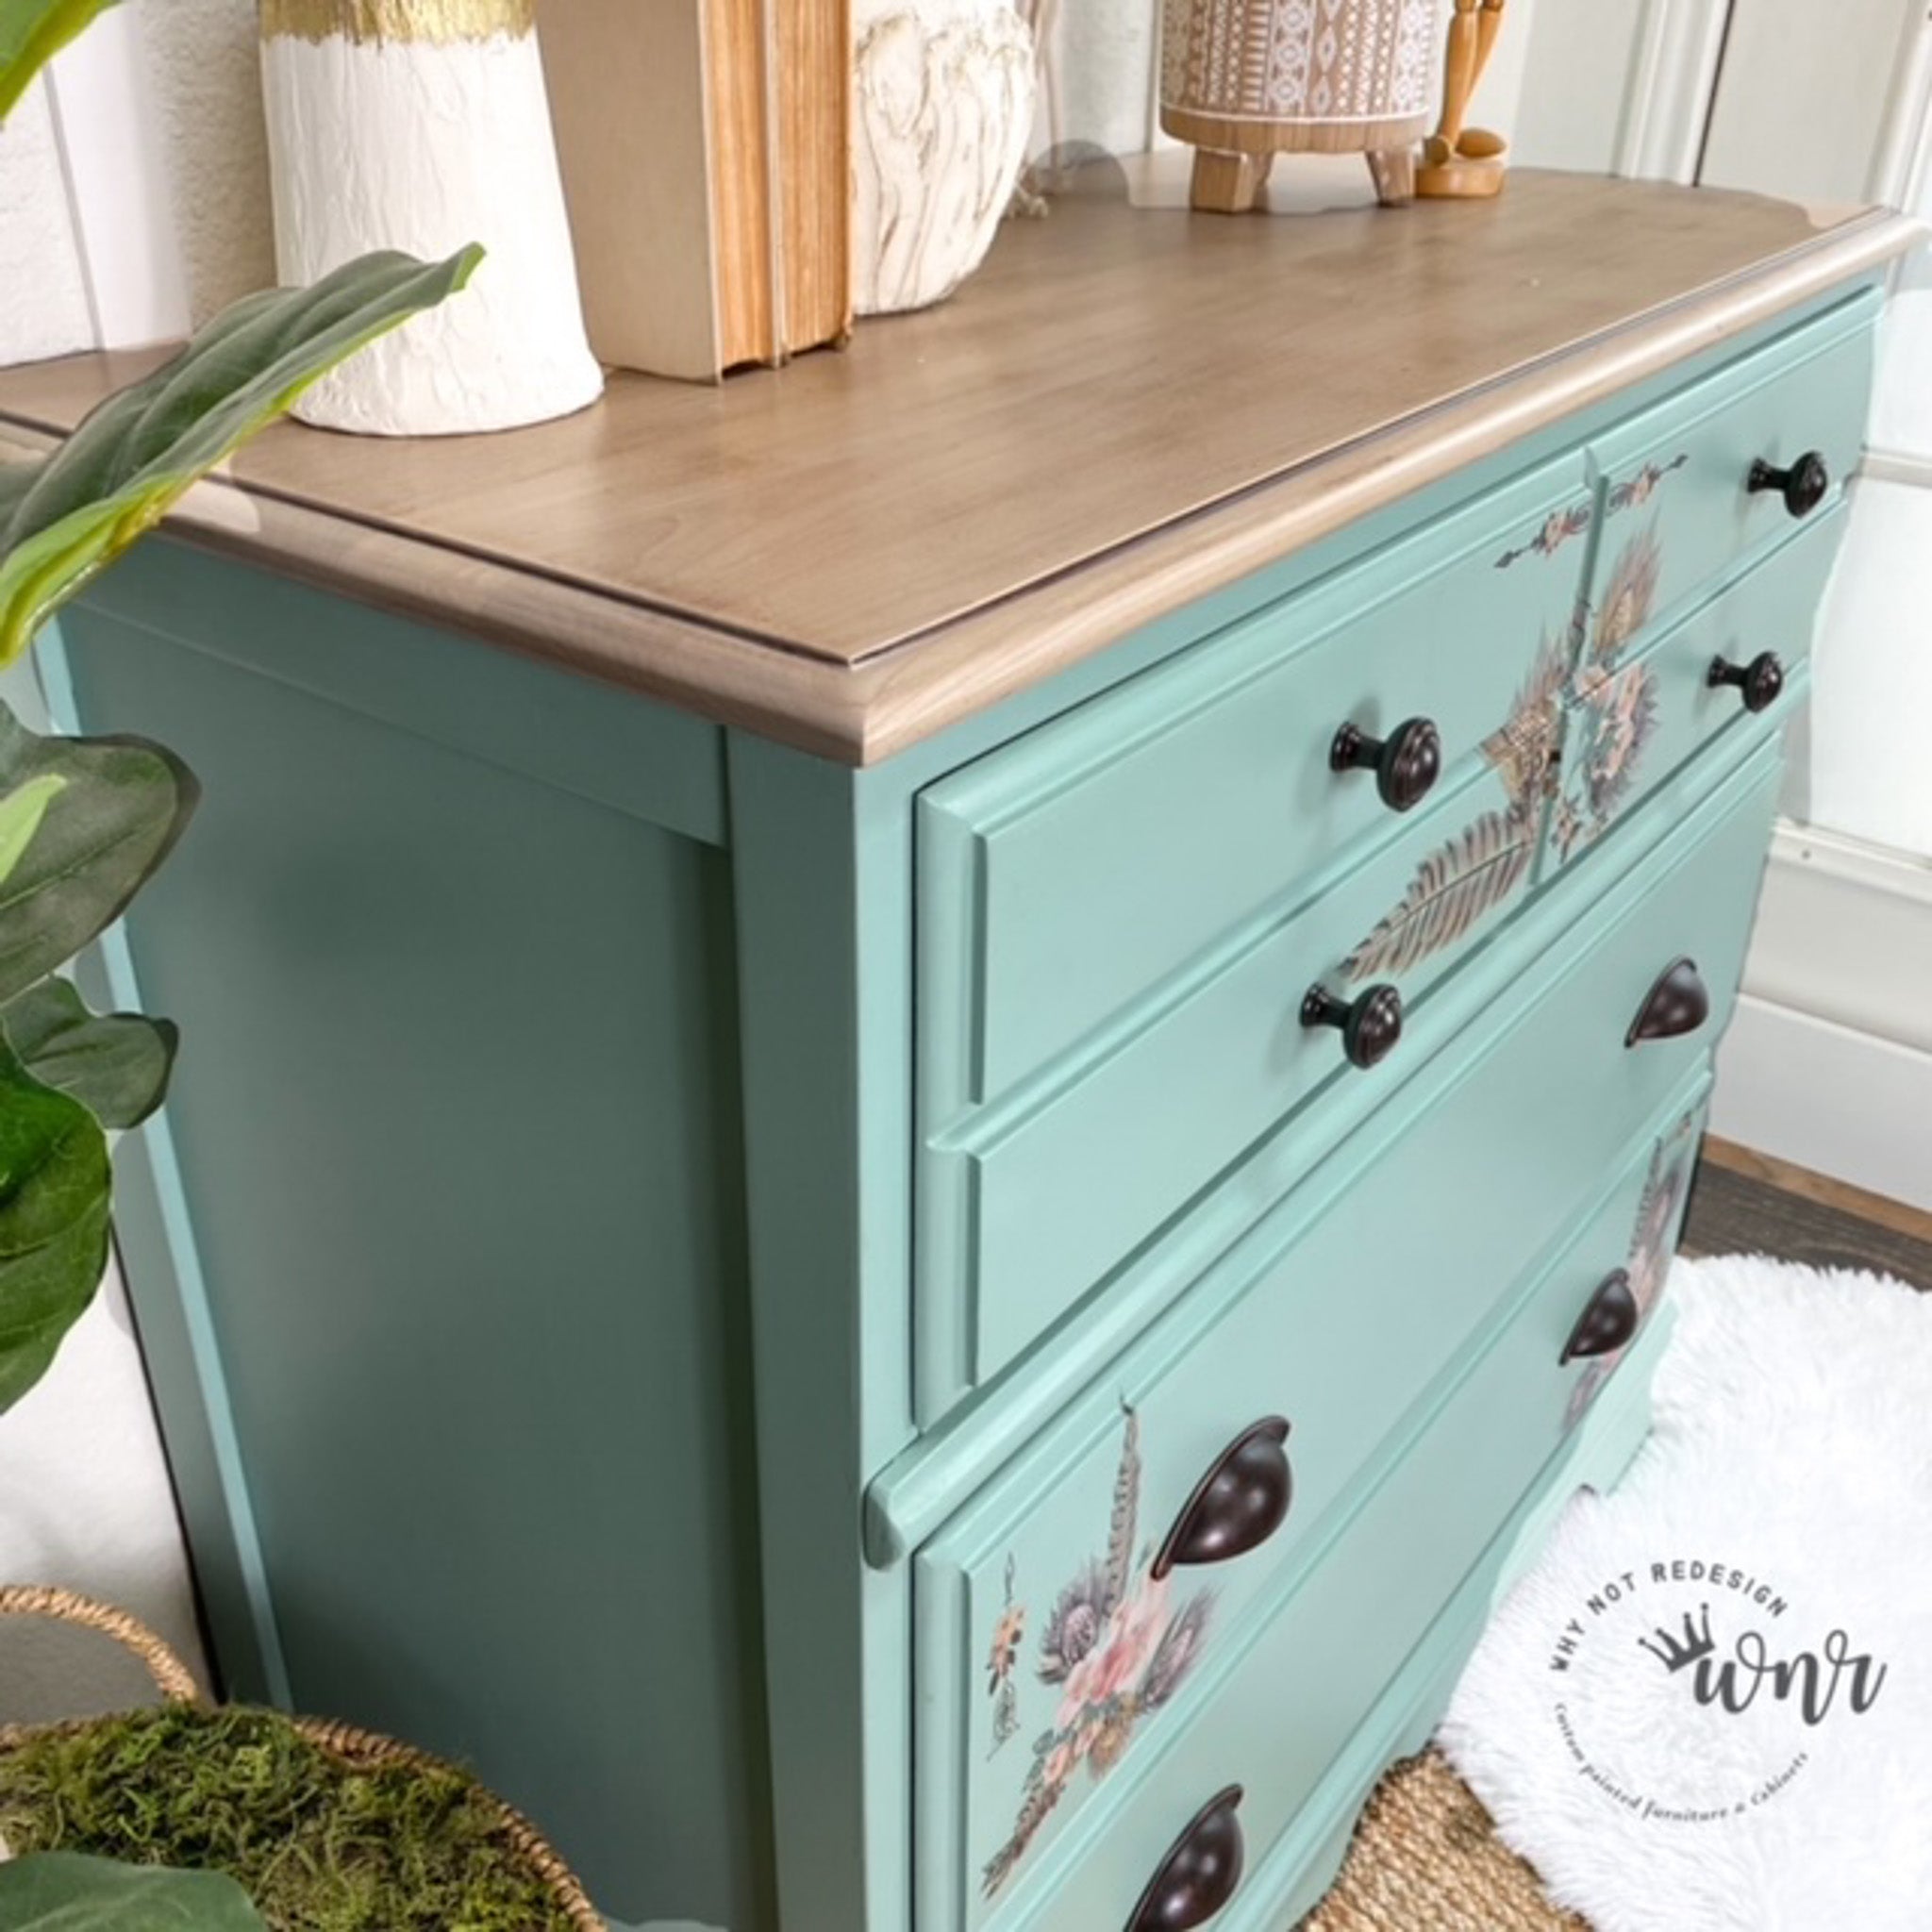 A vintage dresser refurbished by Why Not Redesign is painted in Dixie Belle's Sea Glass chalk mineral paint and has a natural wood top.